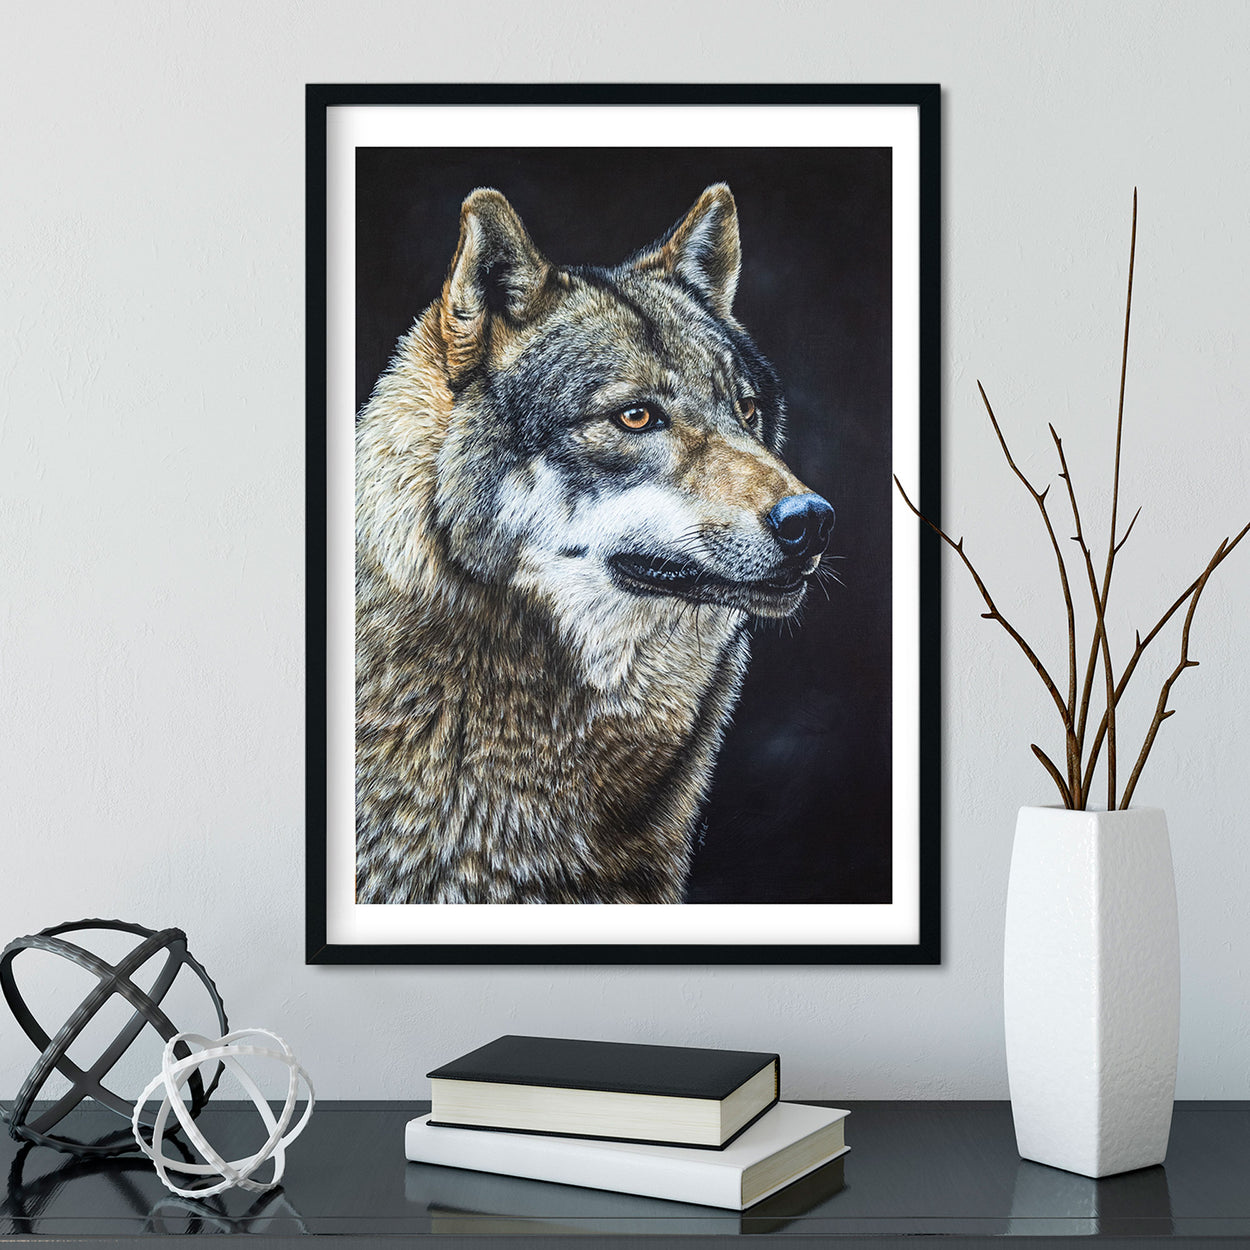 Image of a wolf portrait painting in a black frame on a white wall